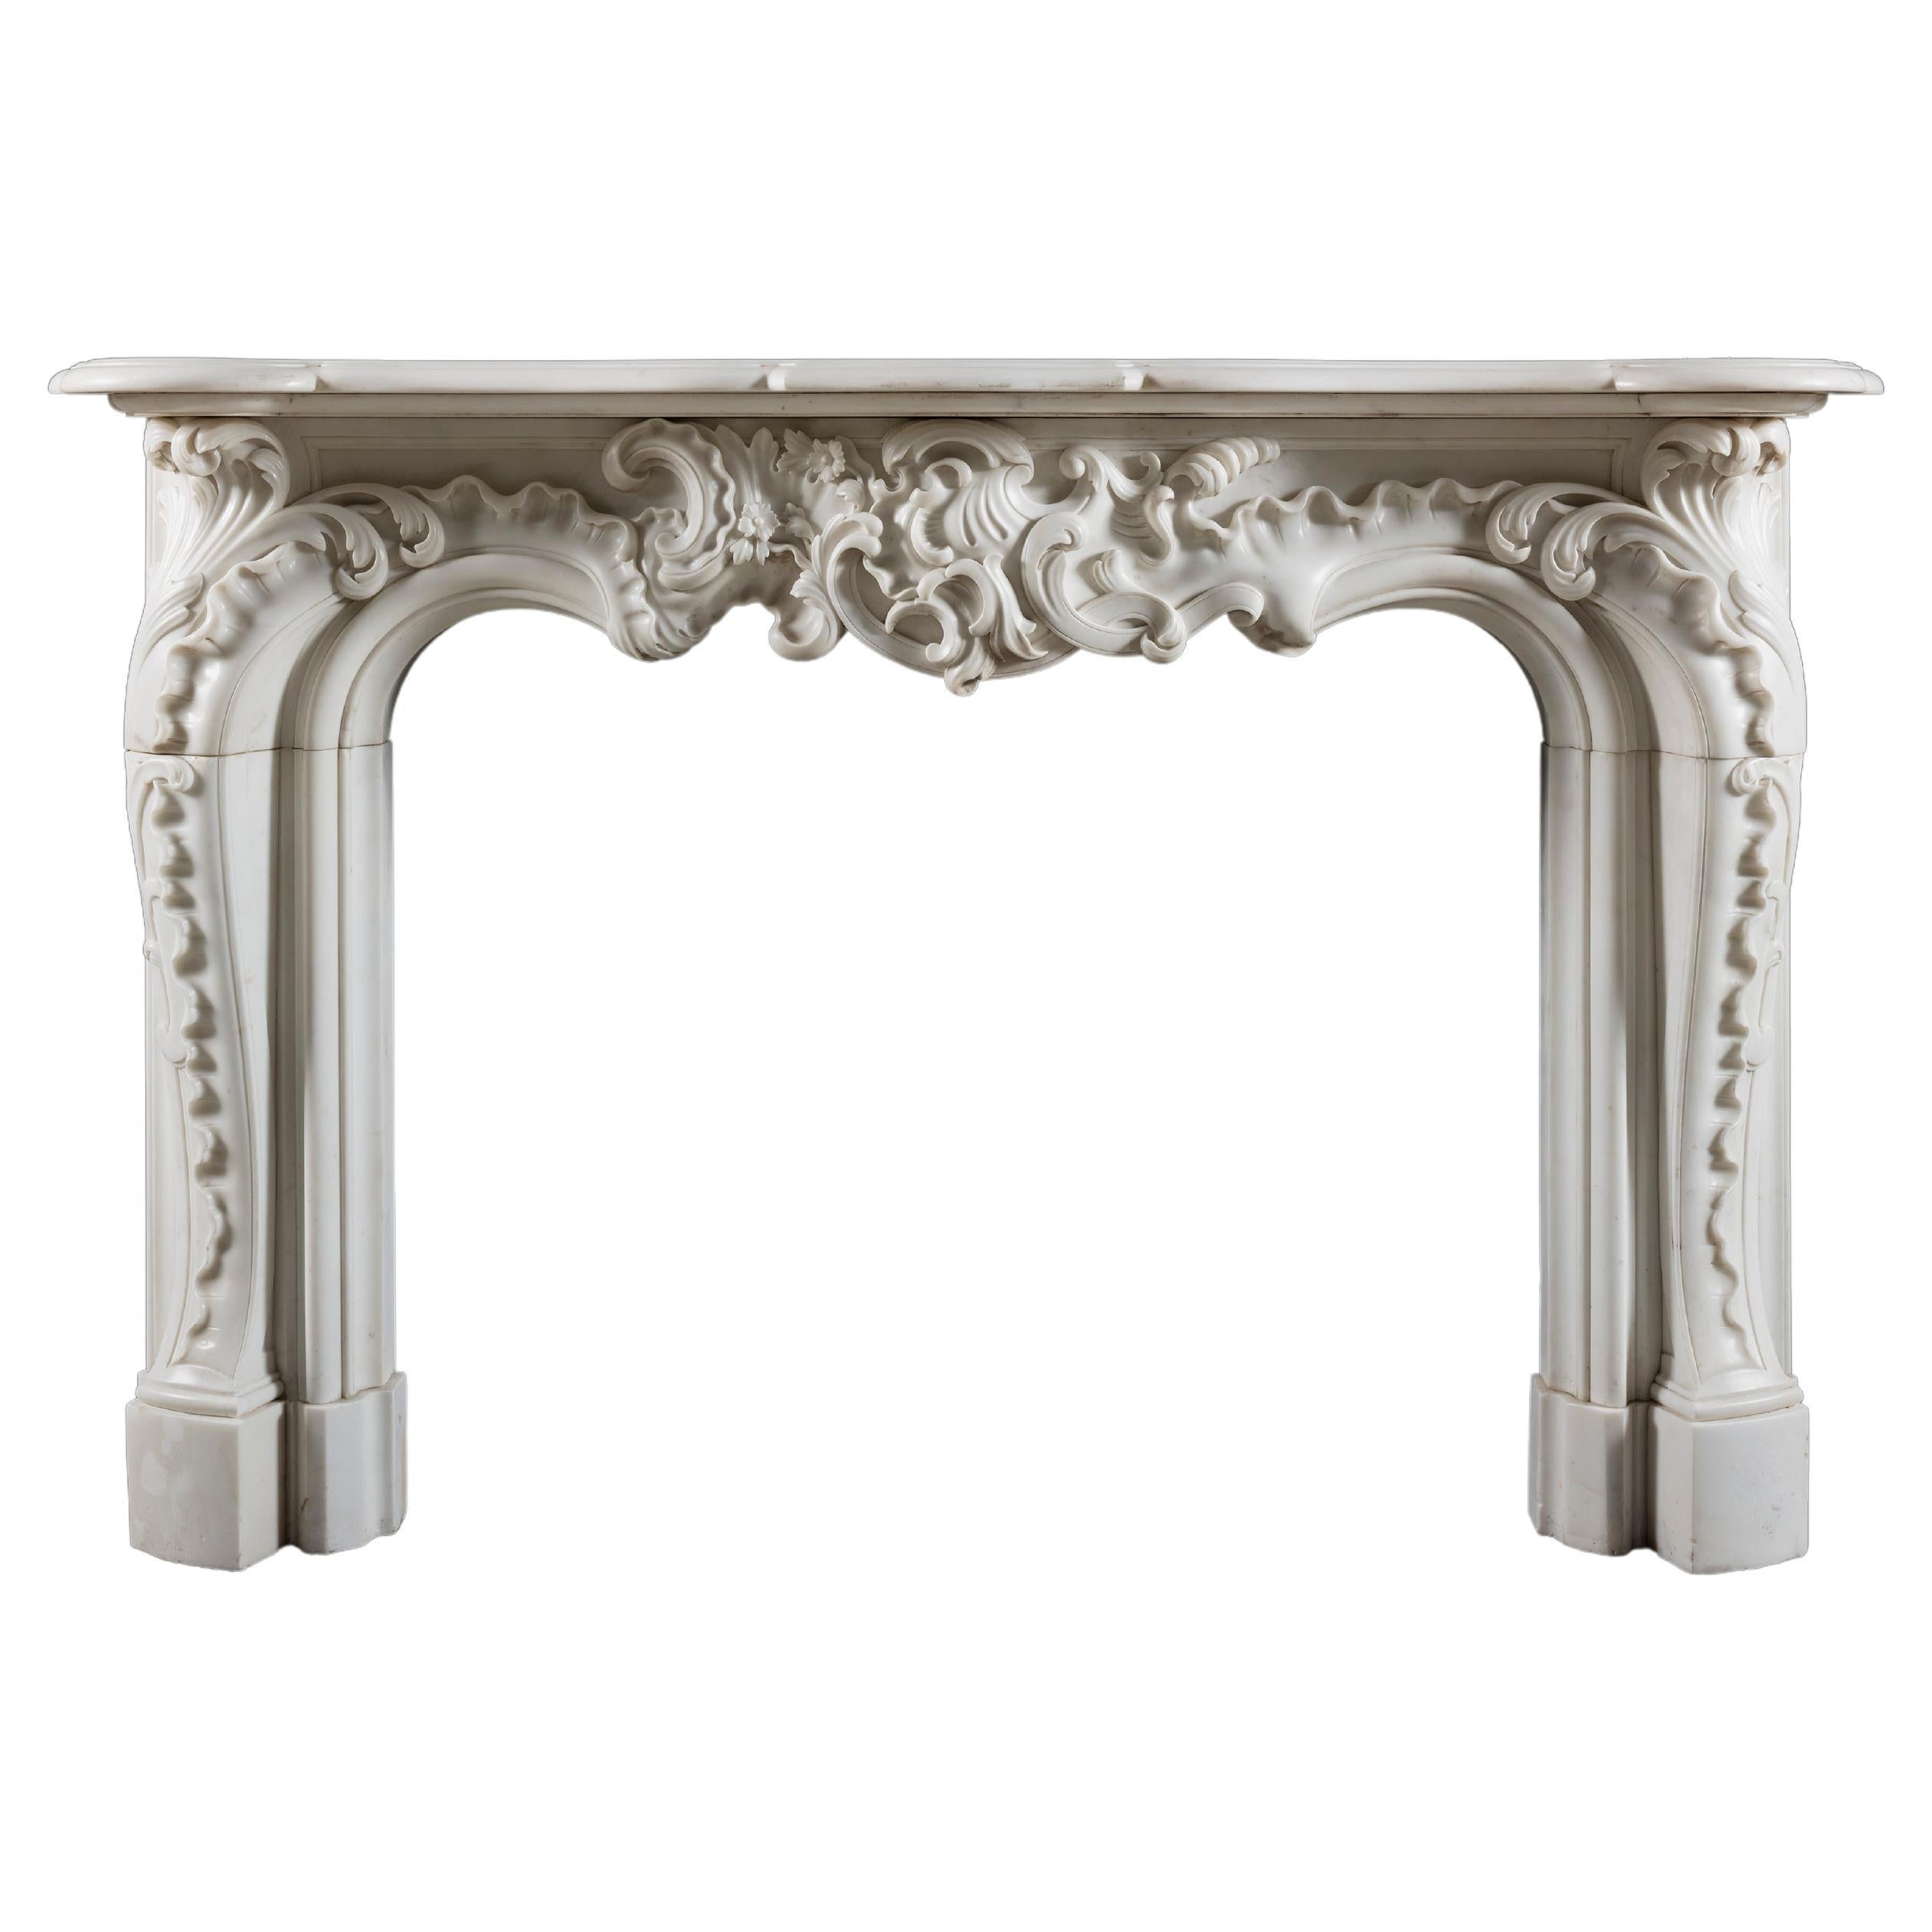 A Rococo 19th century chimneypiece of very large scale in white statuary marble. For Sale